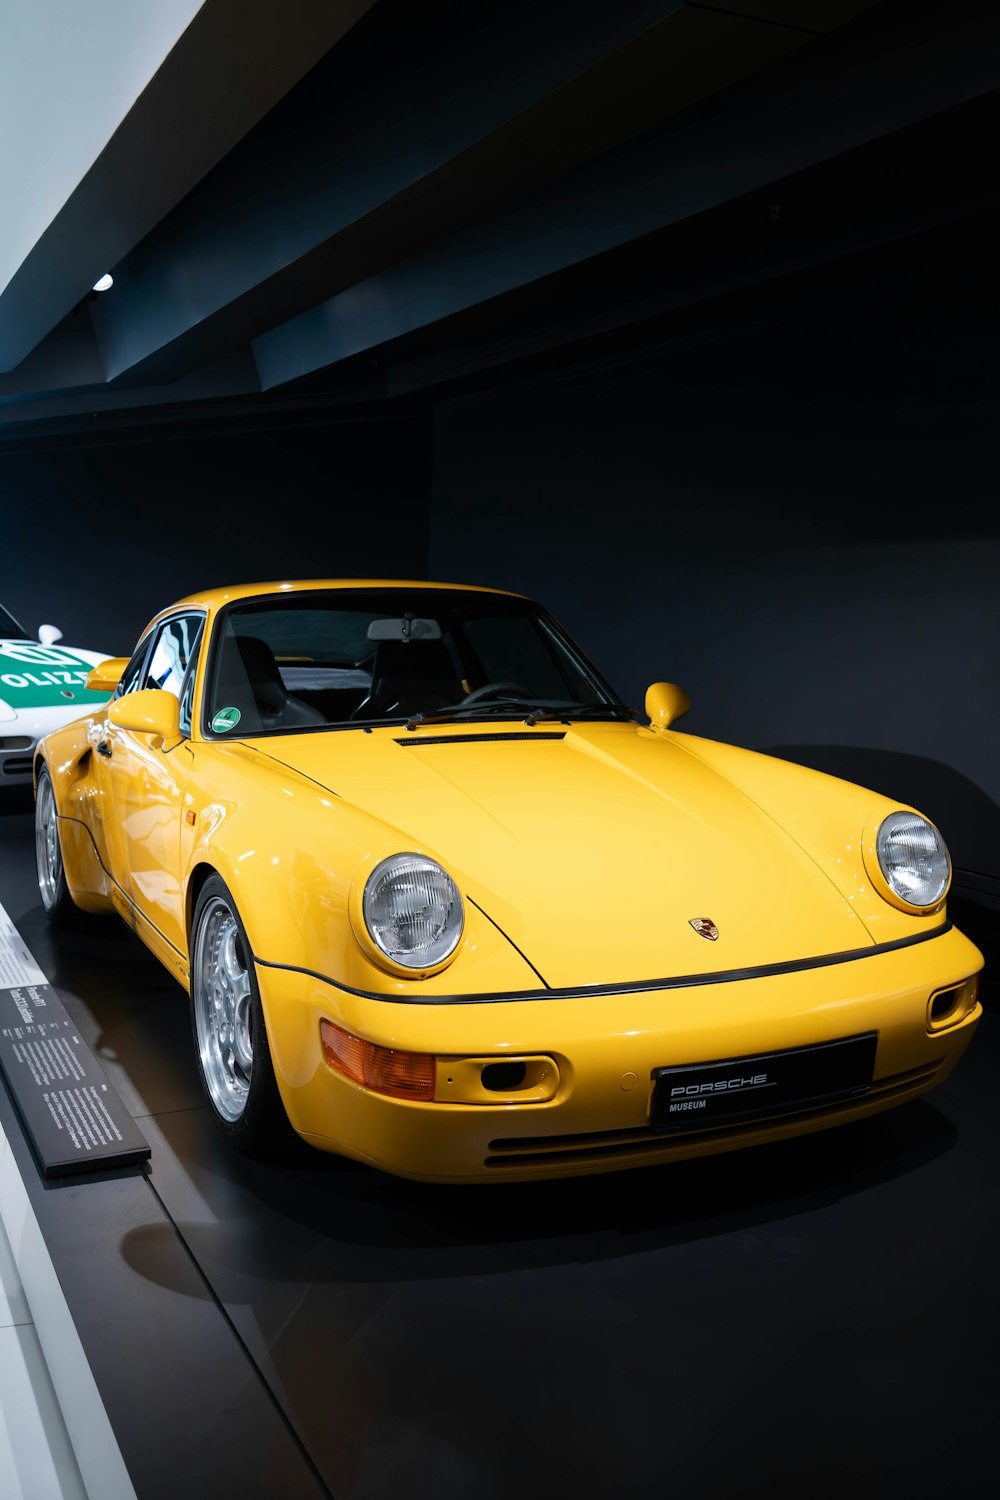 a yellow sports car is on display in a museum